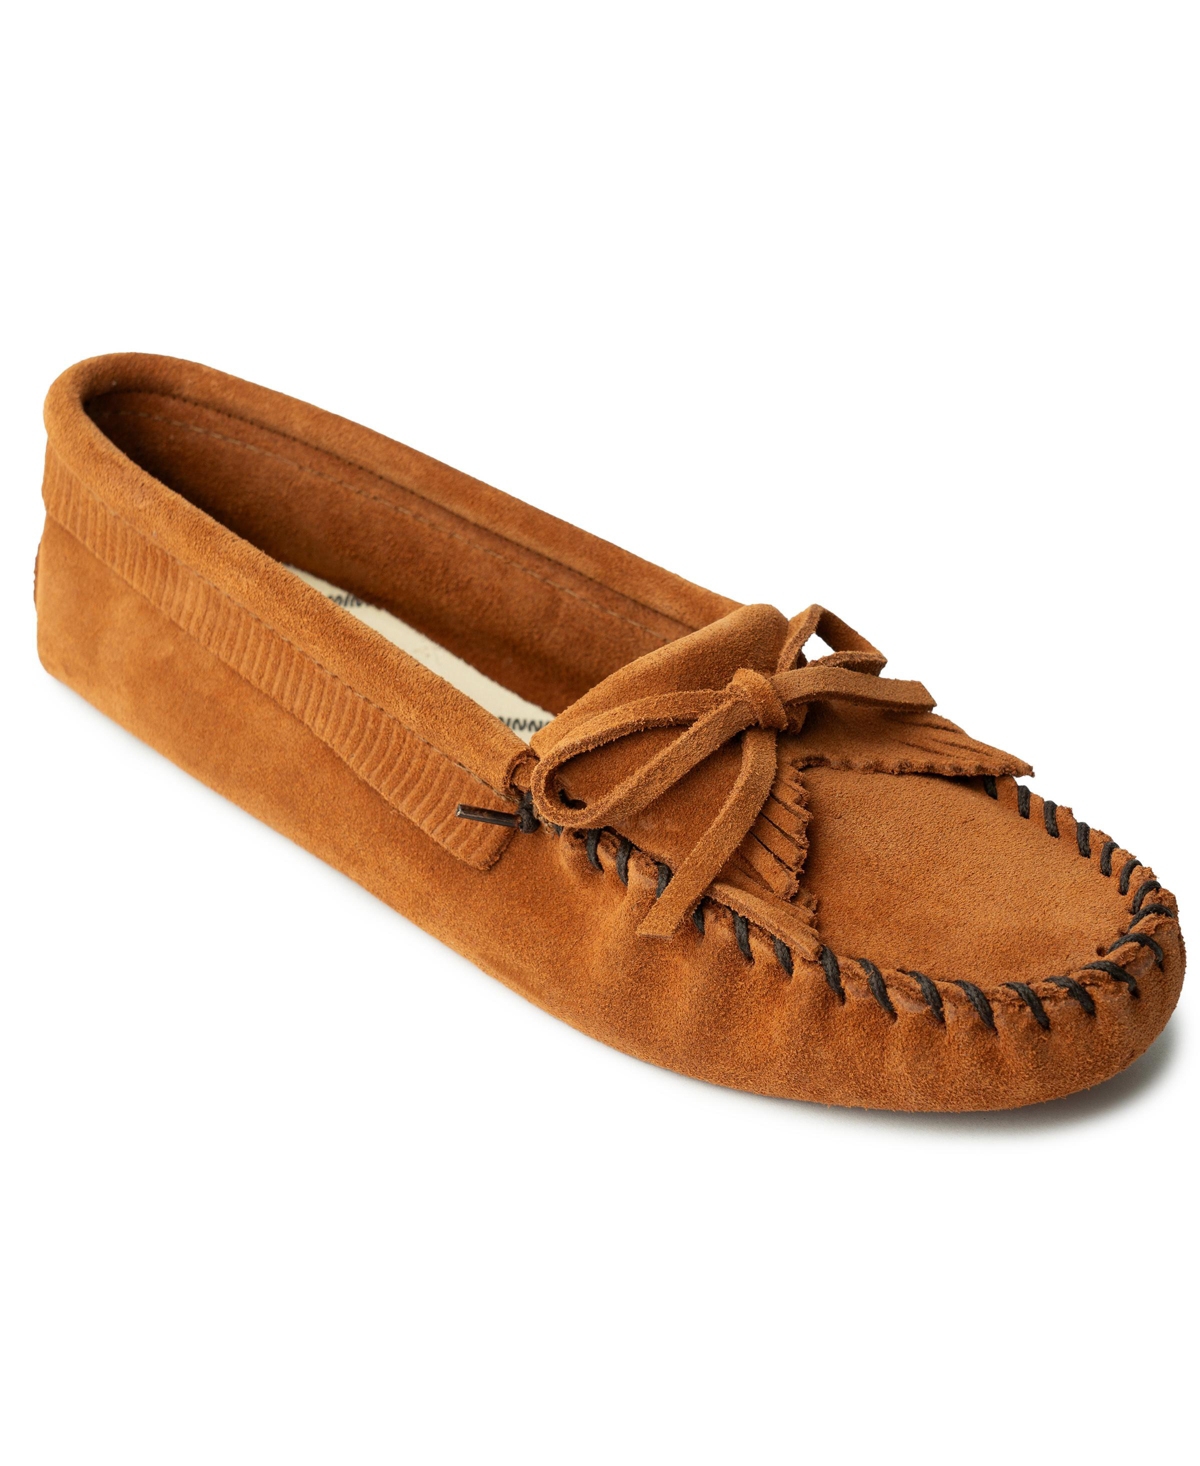 Women's Kilty Softsole Moccasins - Taupe